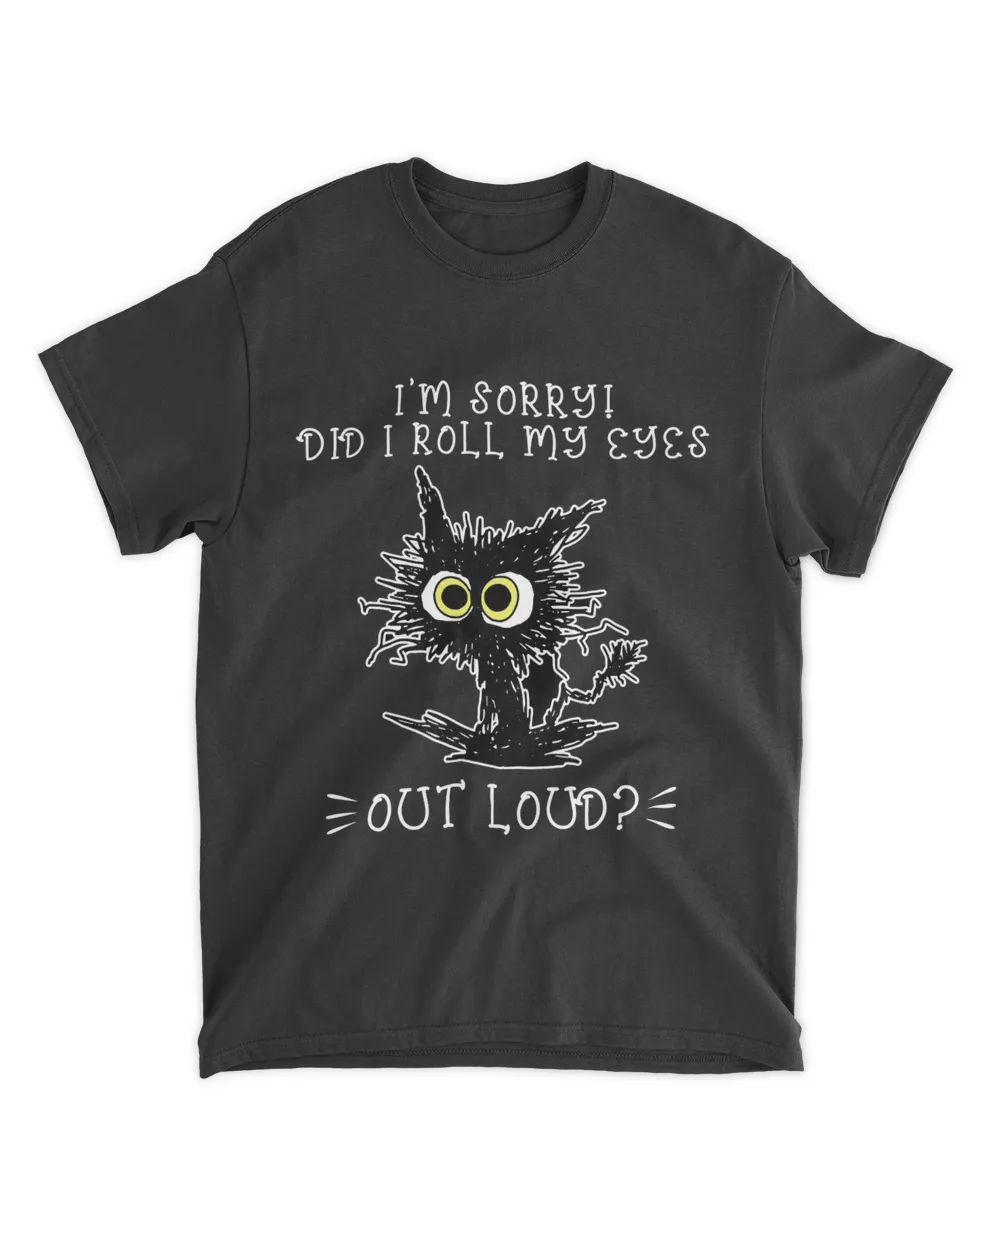 I'm sorry did i roll my eyes out loud cat love shirt